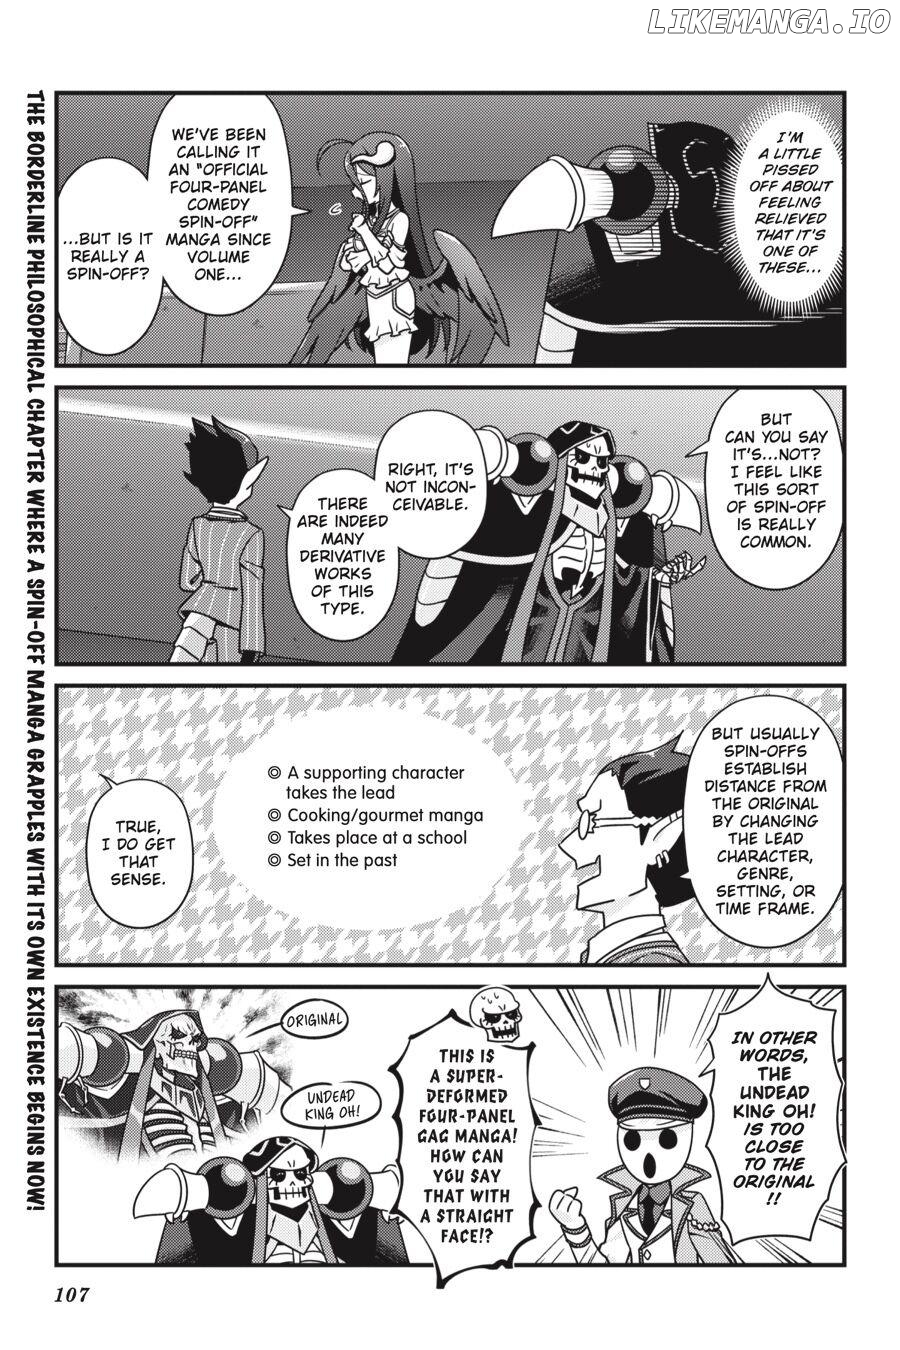 Overlord The Undead King Oh! chapter 36 - page 3